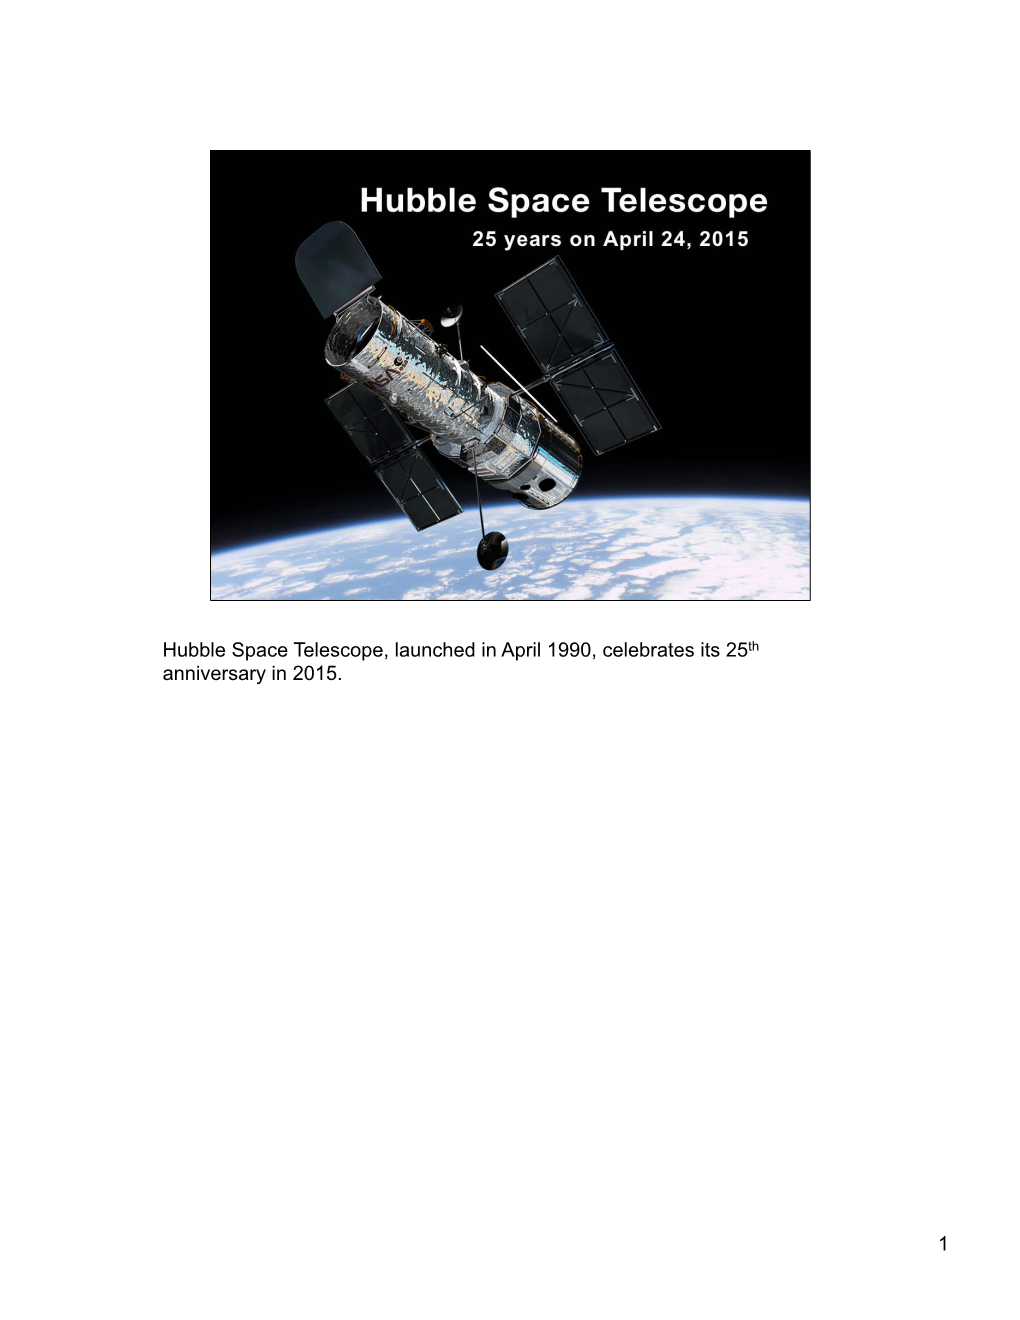 25 Years of the Hubble Space Telescope